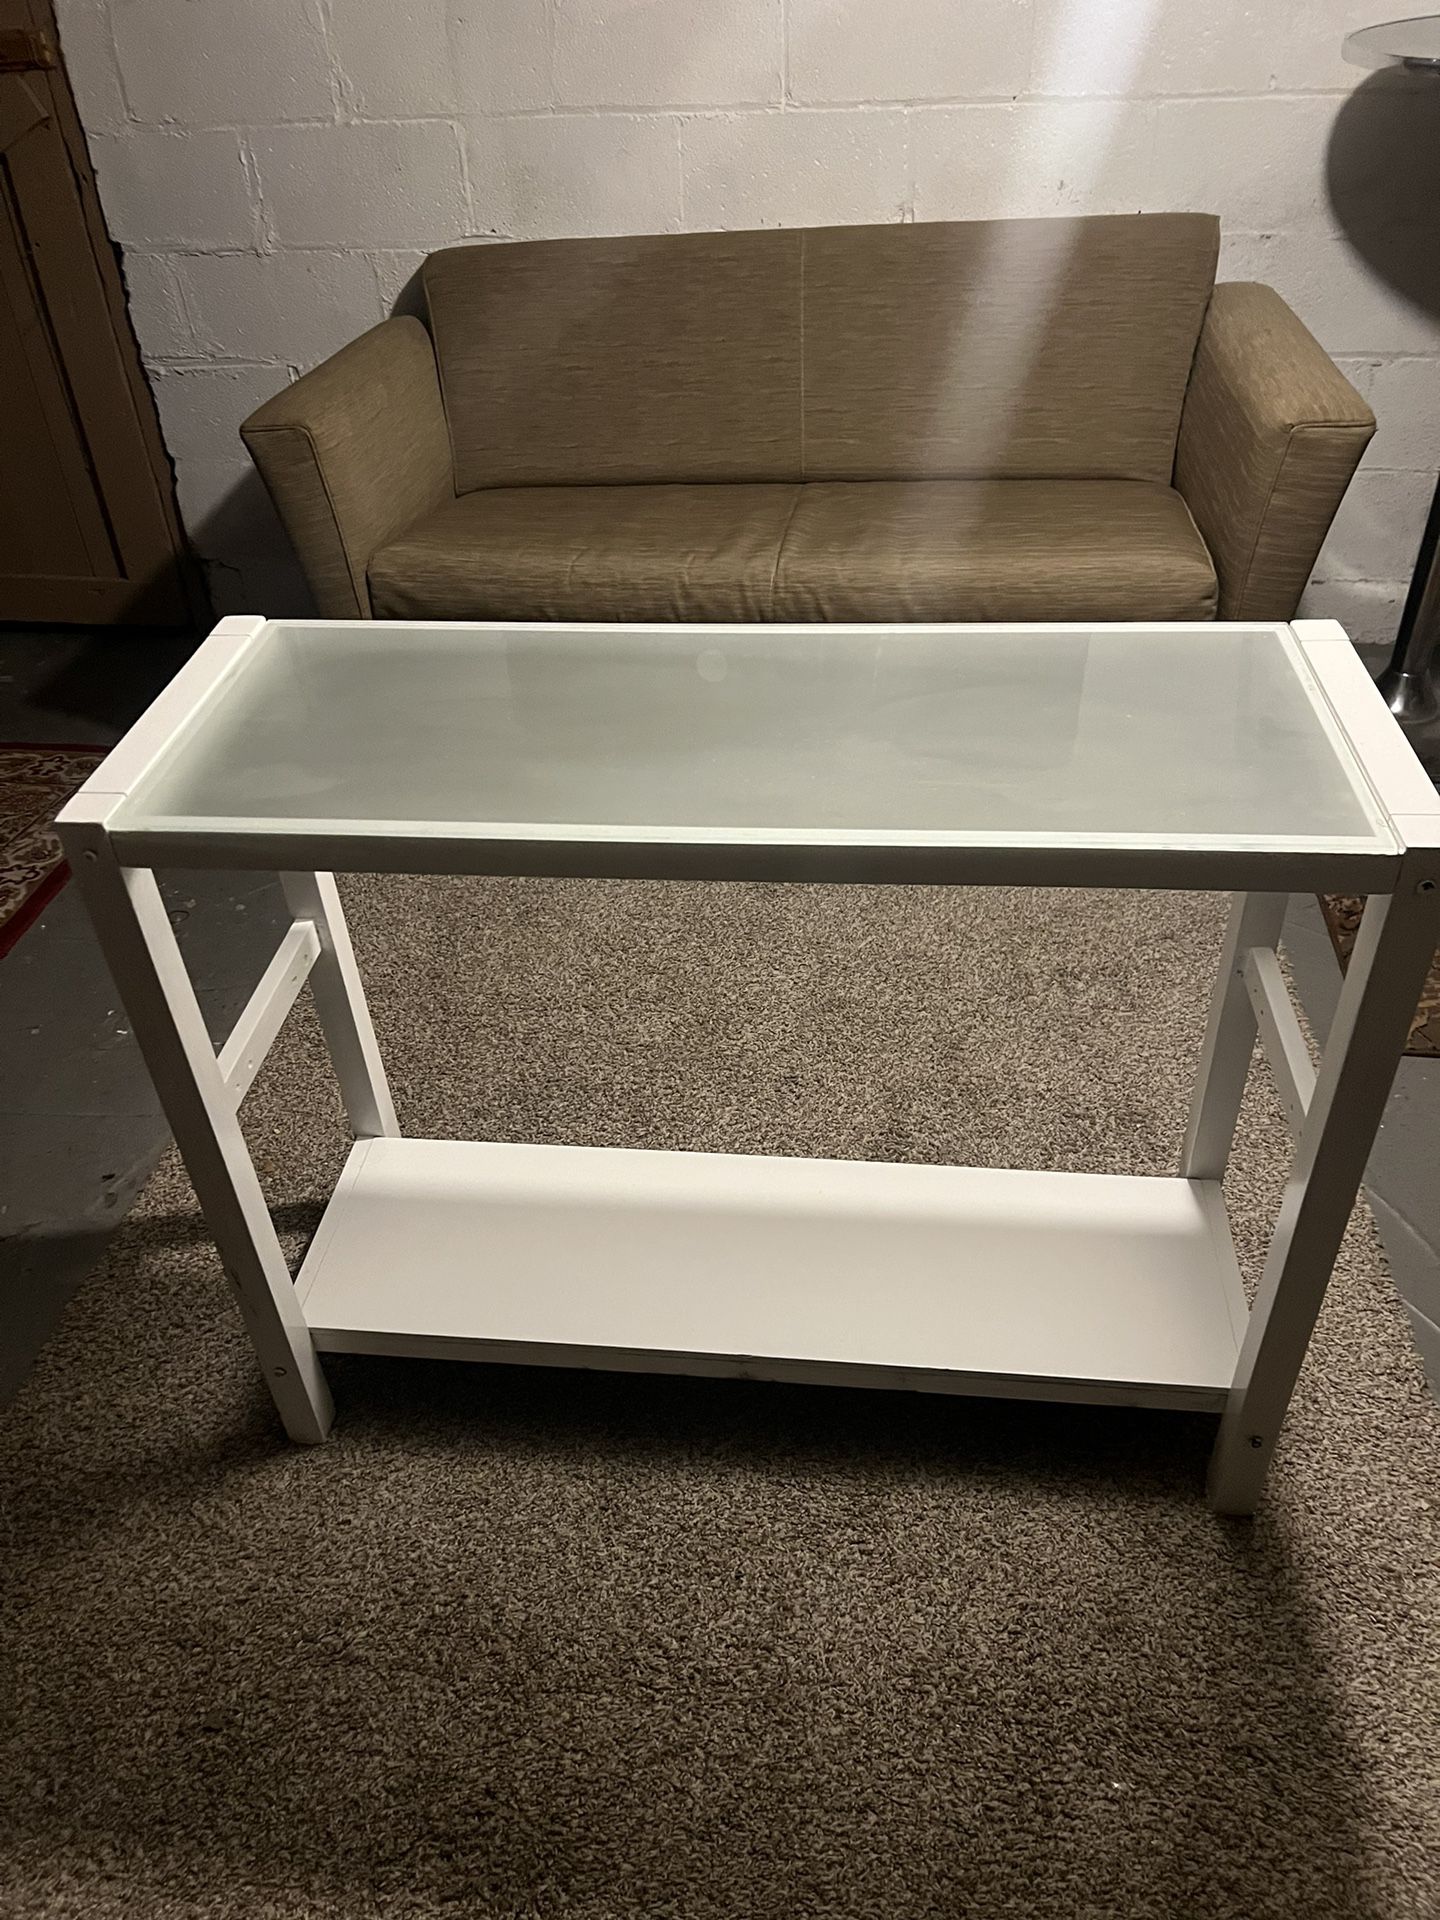 White Furniture Stand Glass Top